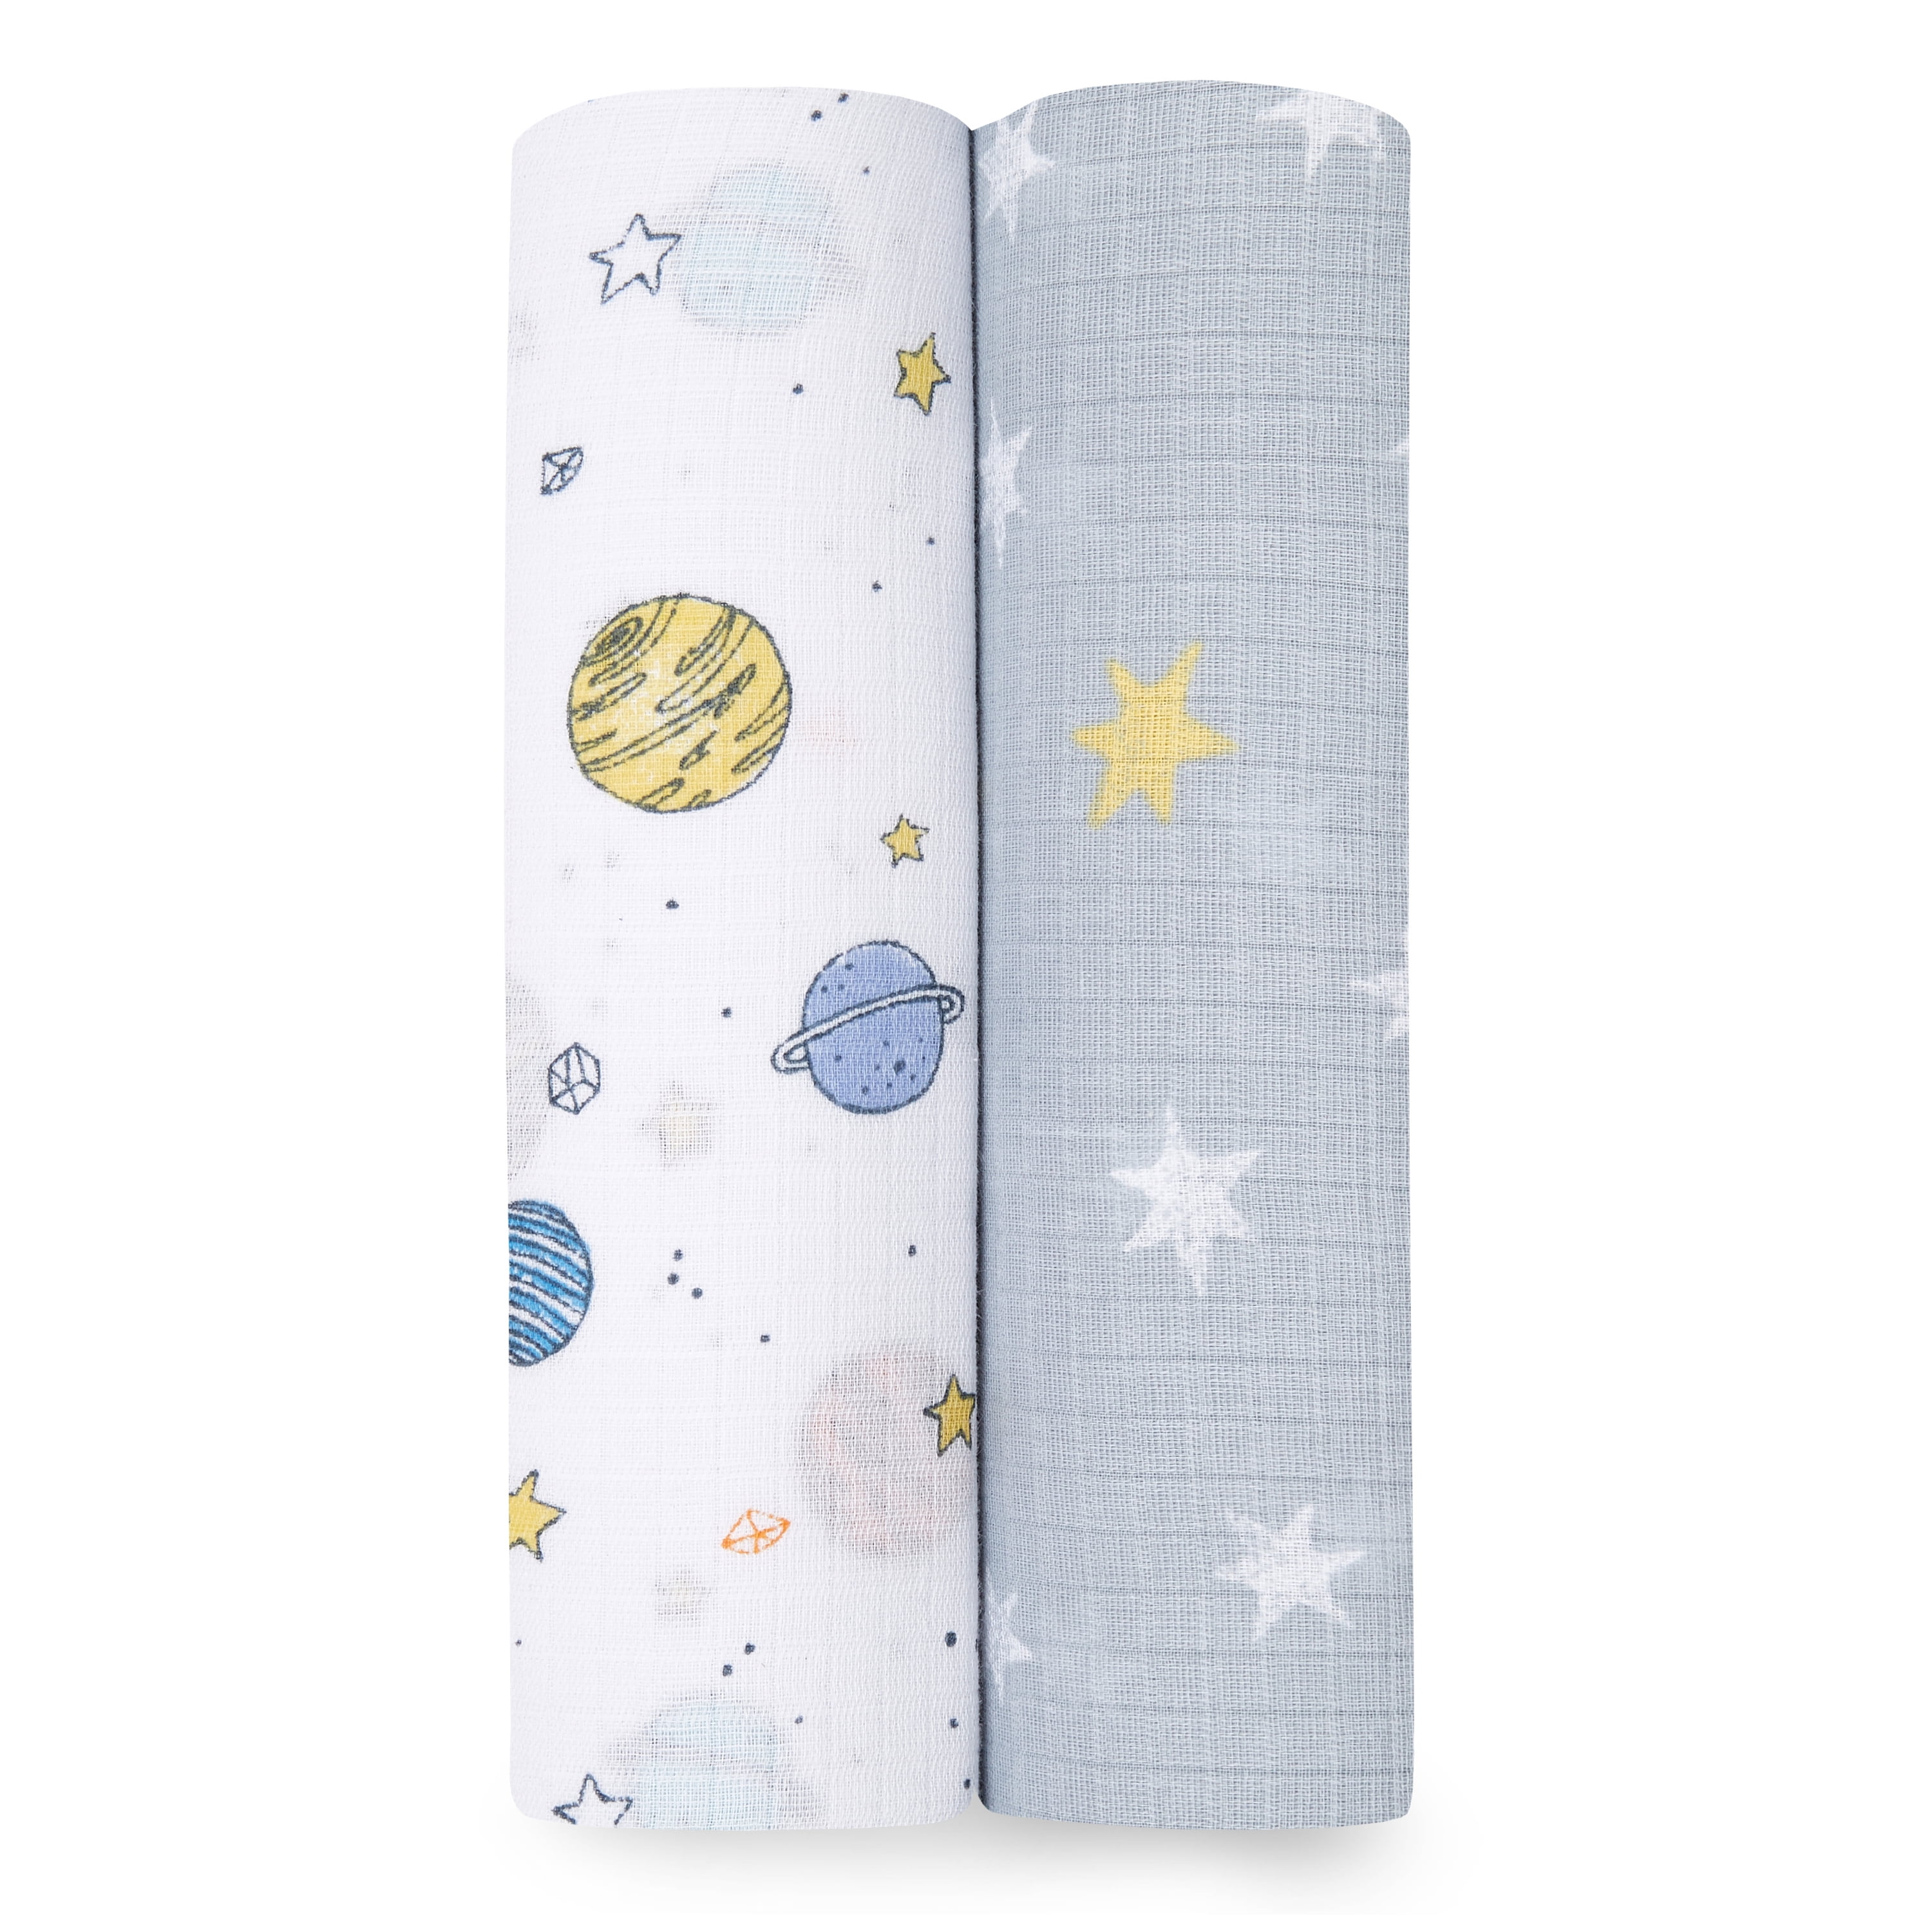 Large 47 X 47 inch aden Map Single anais Classic Swaddle Baby Blanket Around The World 100% Cotton Muslin